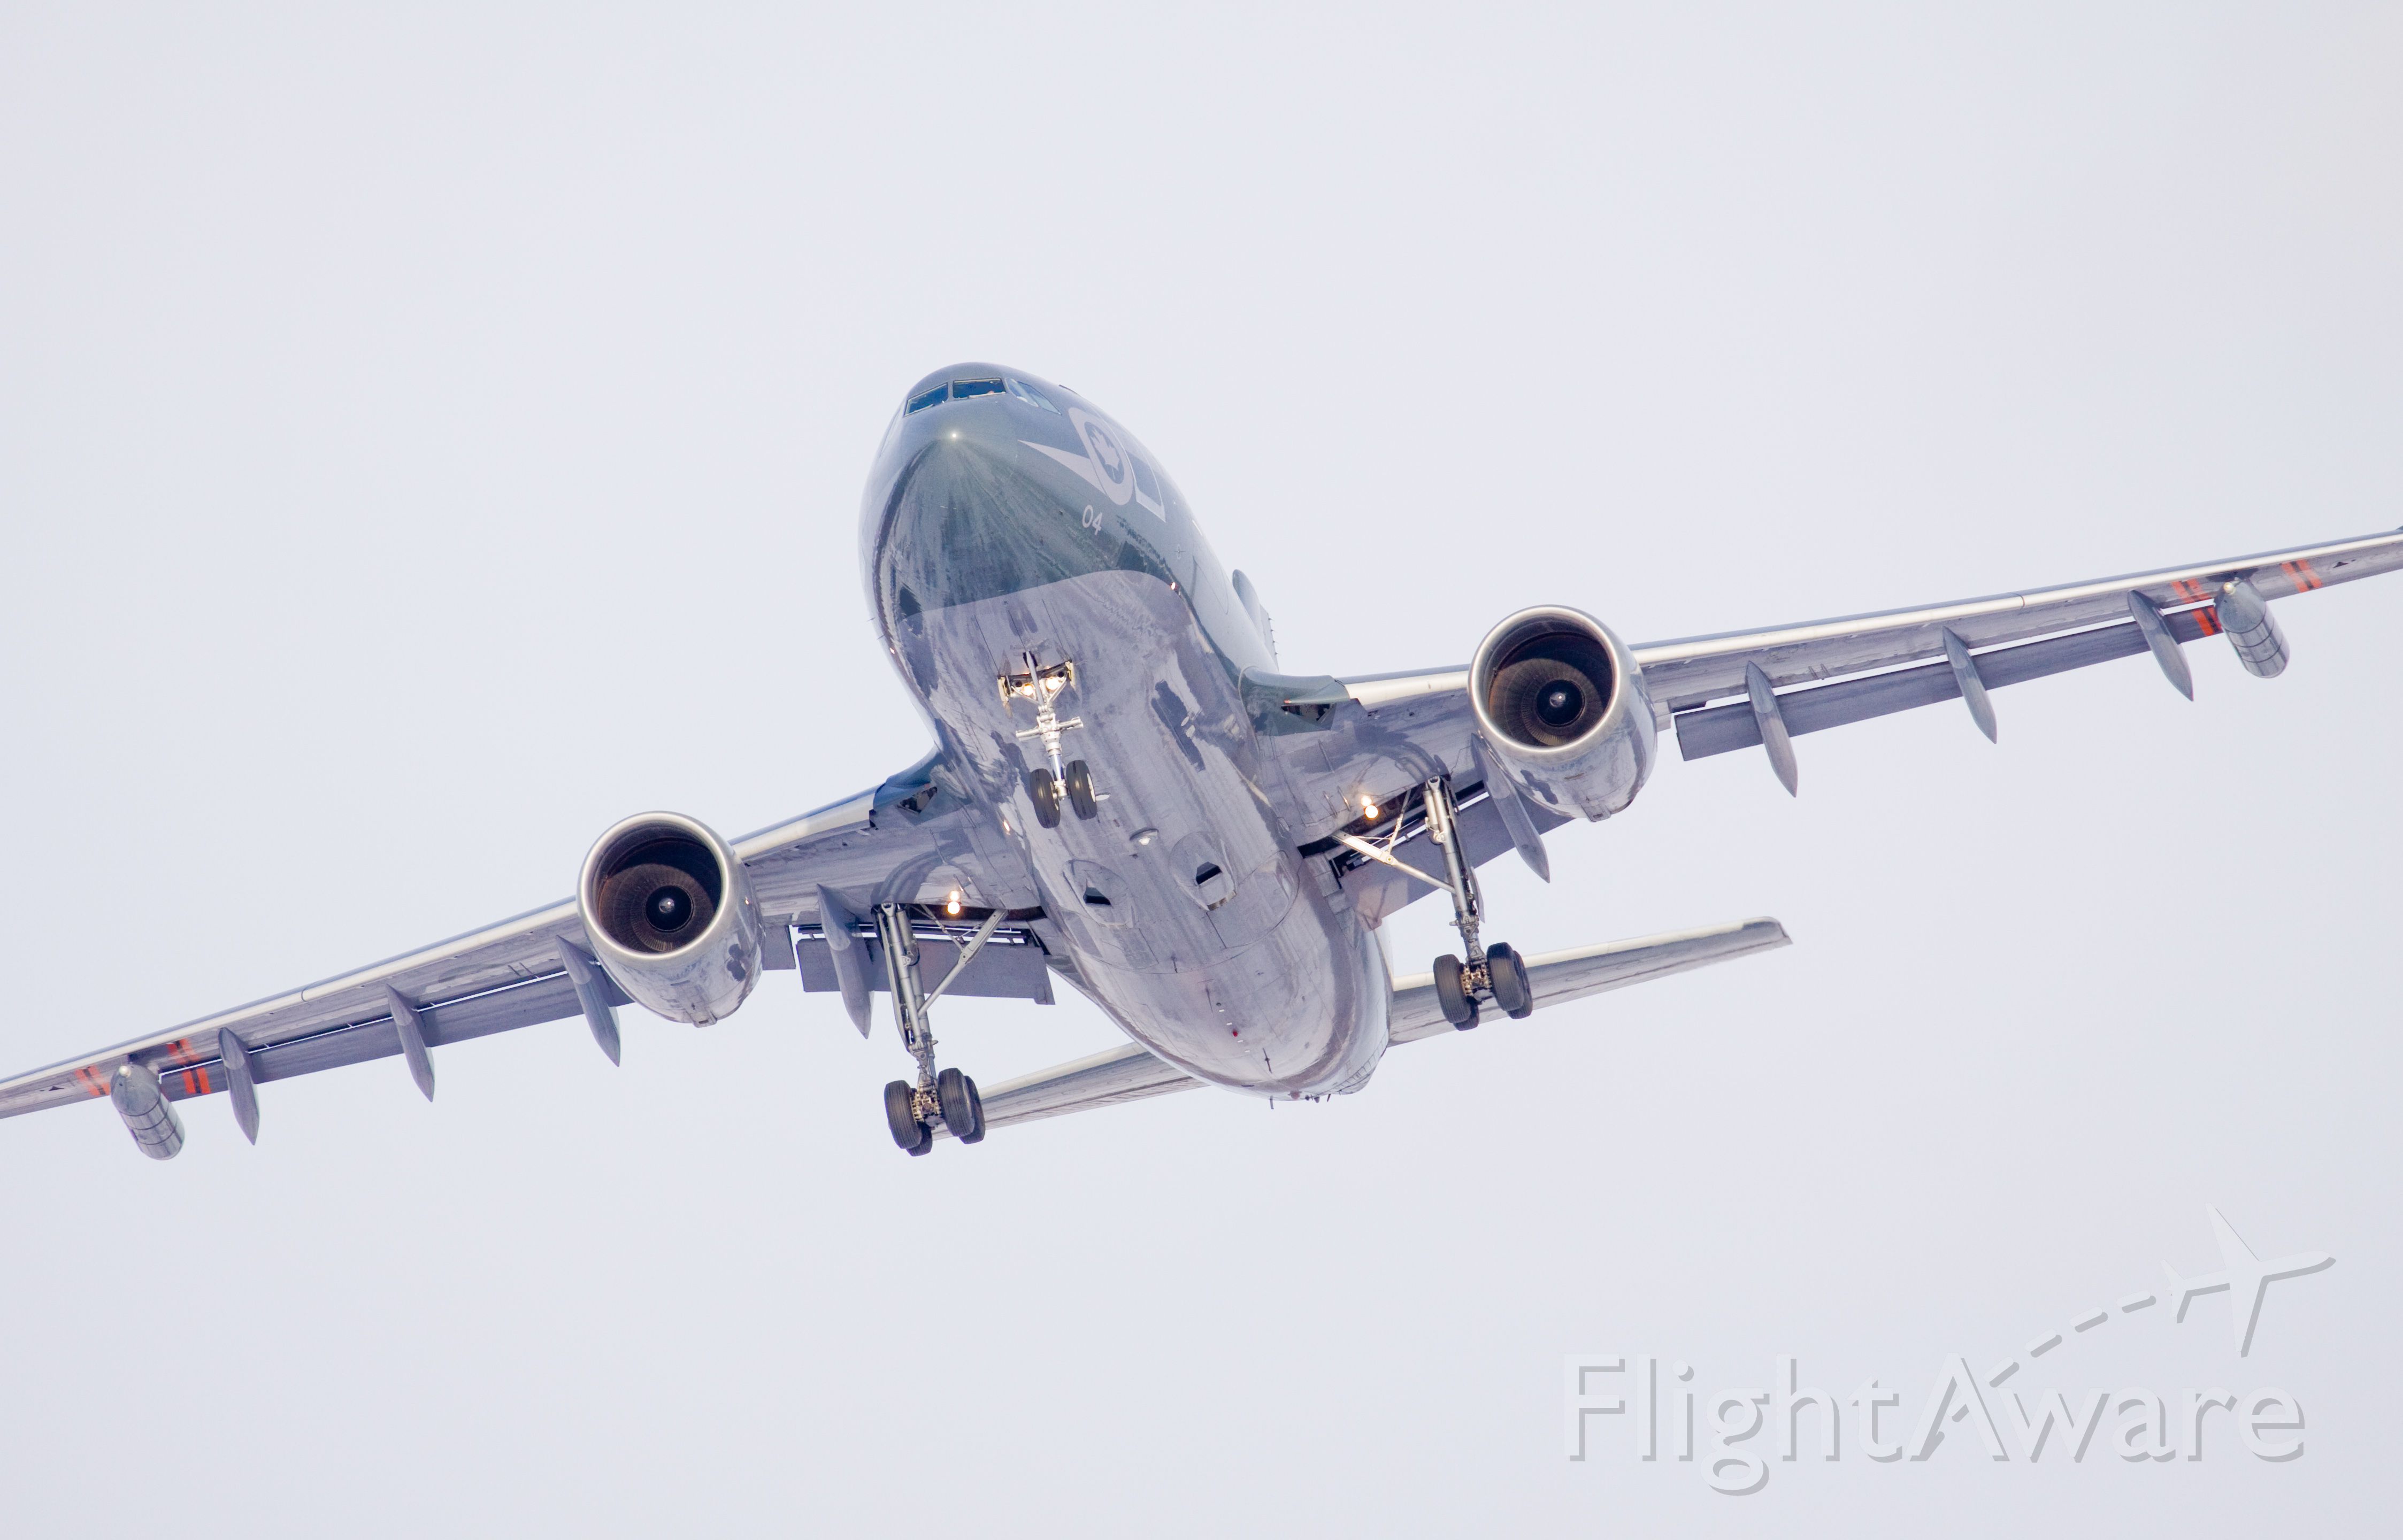 Airbus A310 (N15004) - Husky 04 doing some circuits at CFB Trenton on a cold winter day!